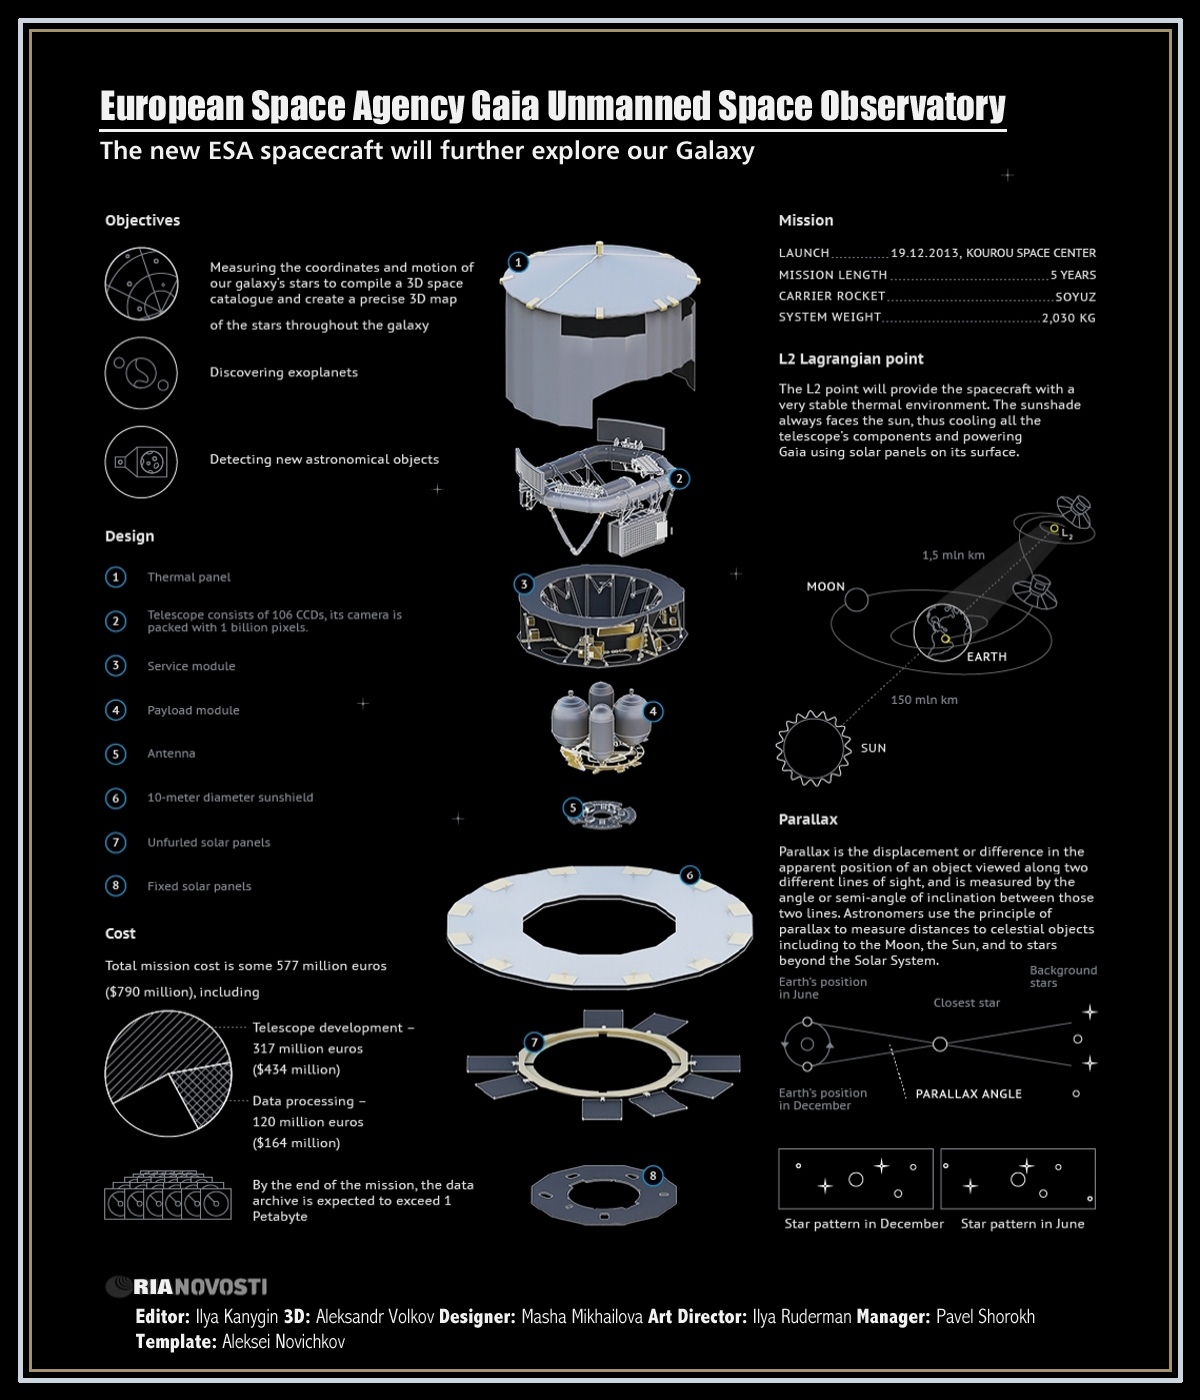 00 RIA-Novosti Infographics. European Space Agency Gaia Unmanned Space Observatory. 2013